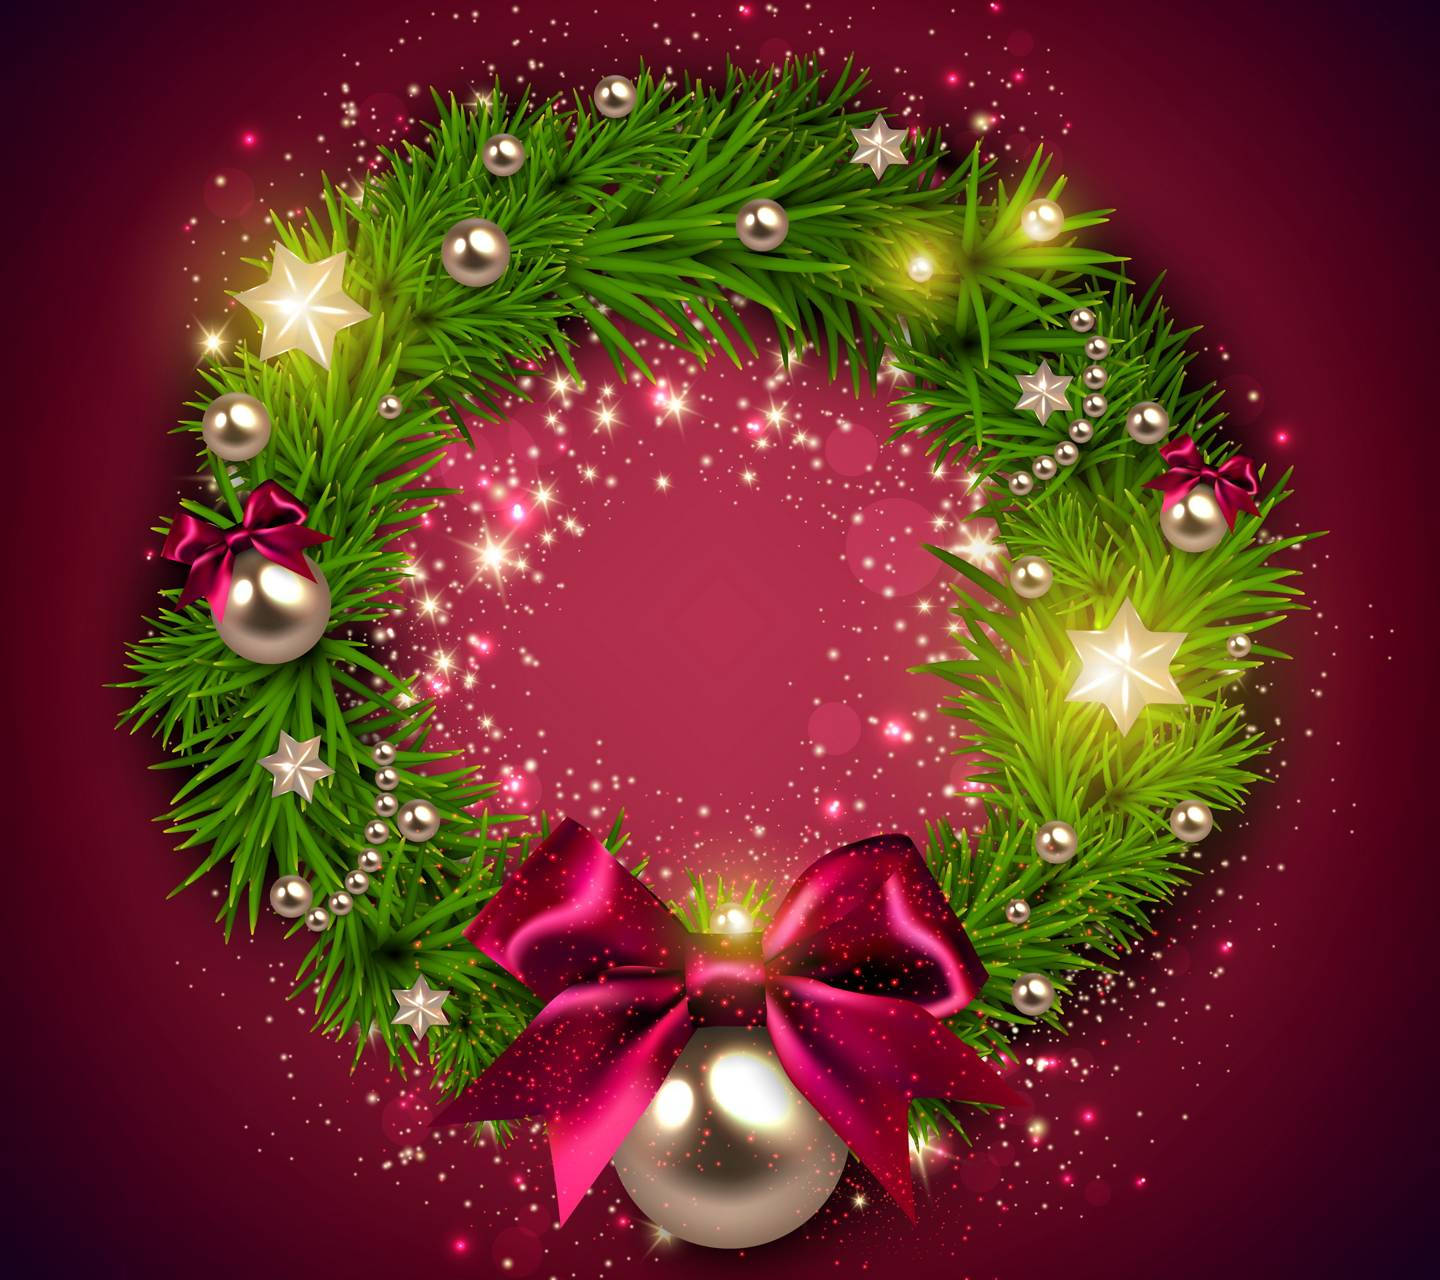 Caption: Glorious Christmas Wreath with Purple Ribbon Wallpaper